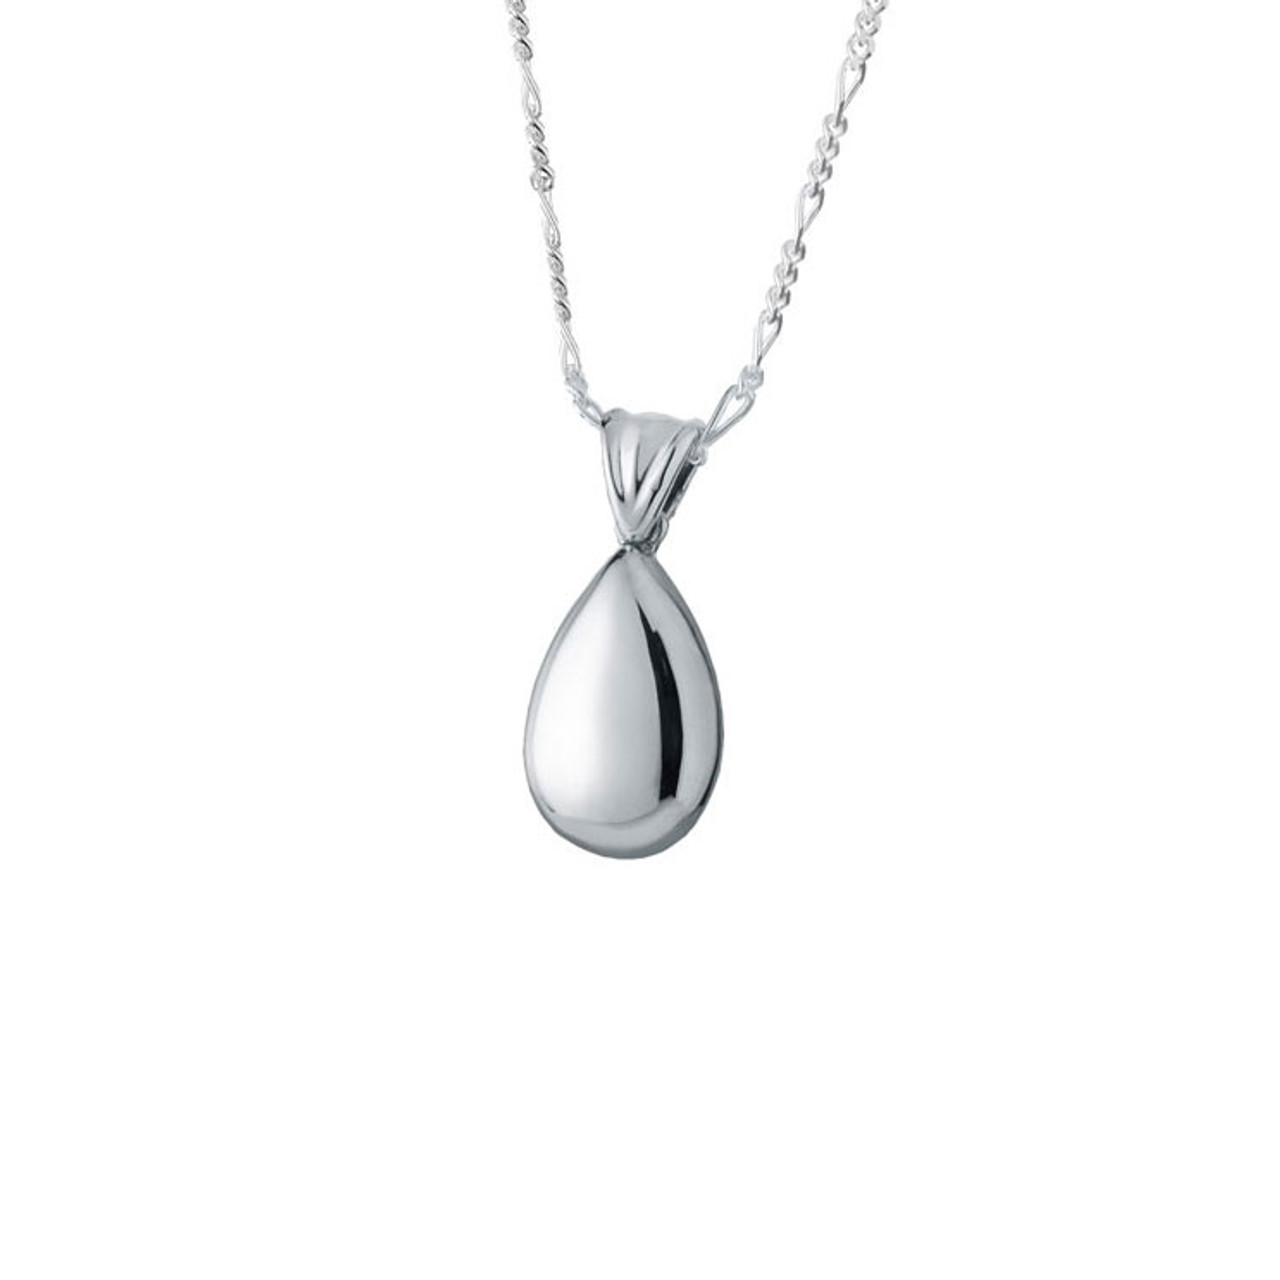 Puff Teardrop - Stainless Steel Cremation Ashes Jewellery Urn Pendant